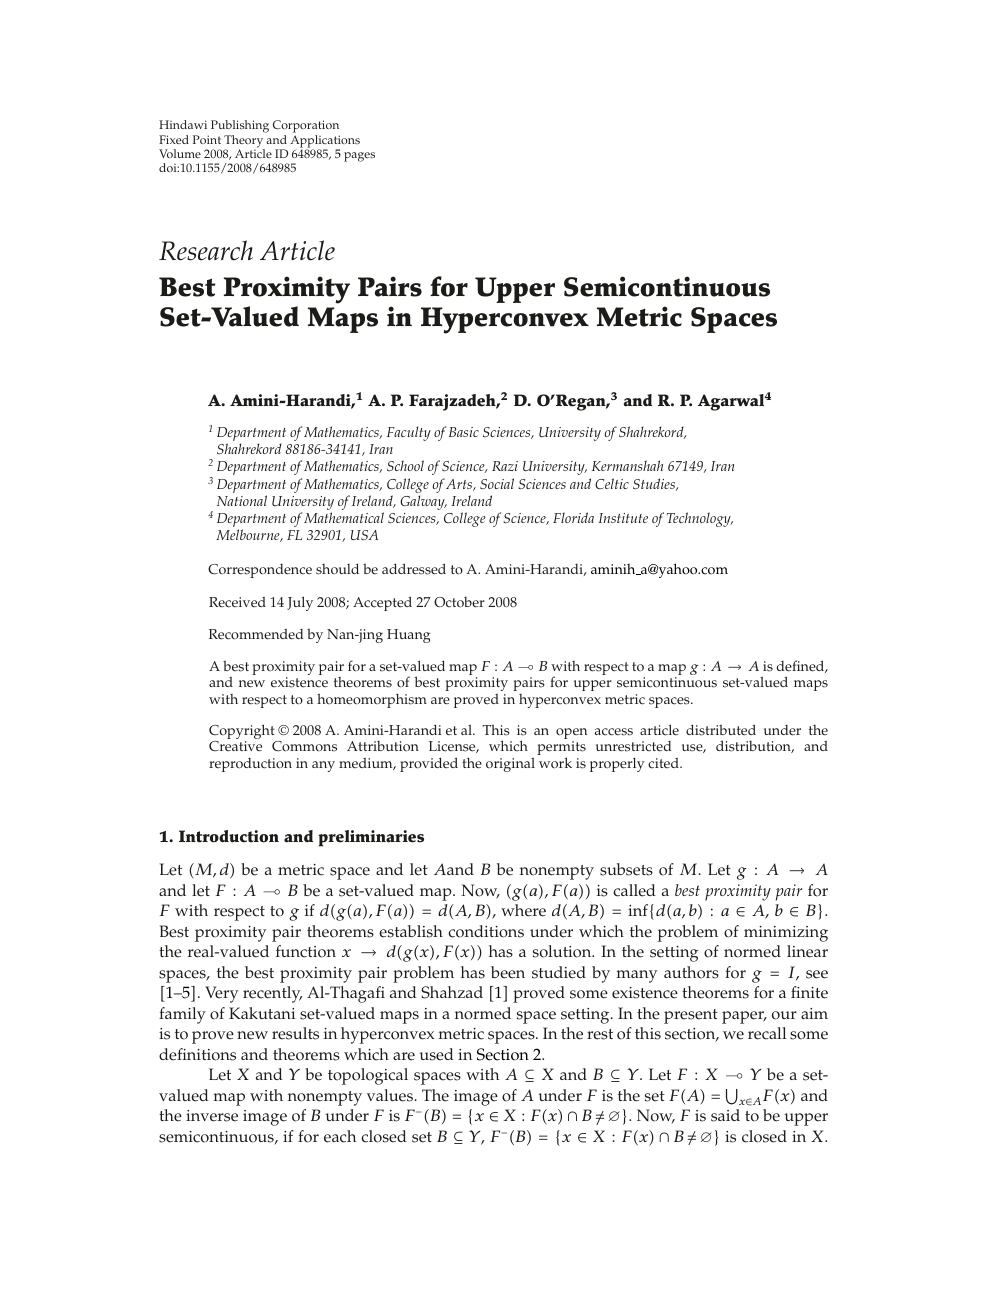 Best Proximity Pairs For Upper Semicontinuous Set Valued Maps In Hyperconvex Metric Spaces Topic Of Research Paper In Mathematics Download Scholarly Article Pdf And Read For Free On Cyberleninka Open Science Hub